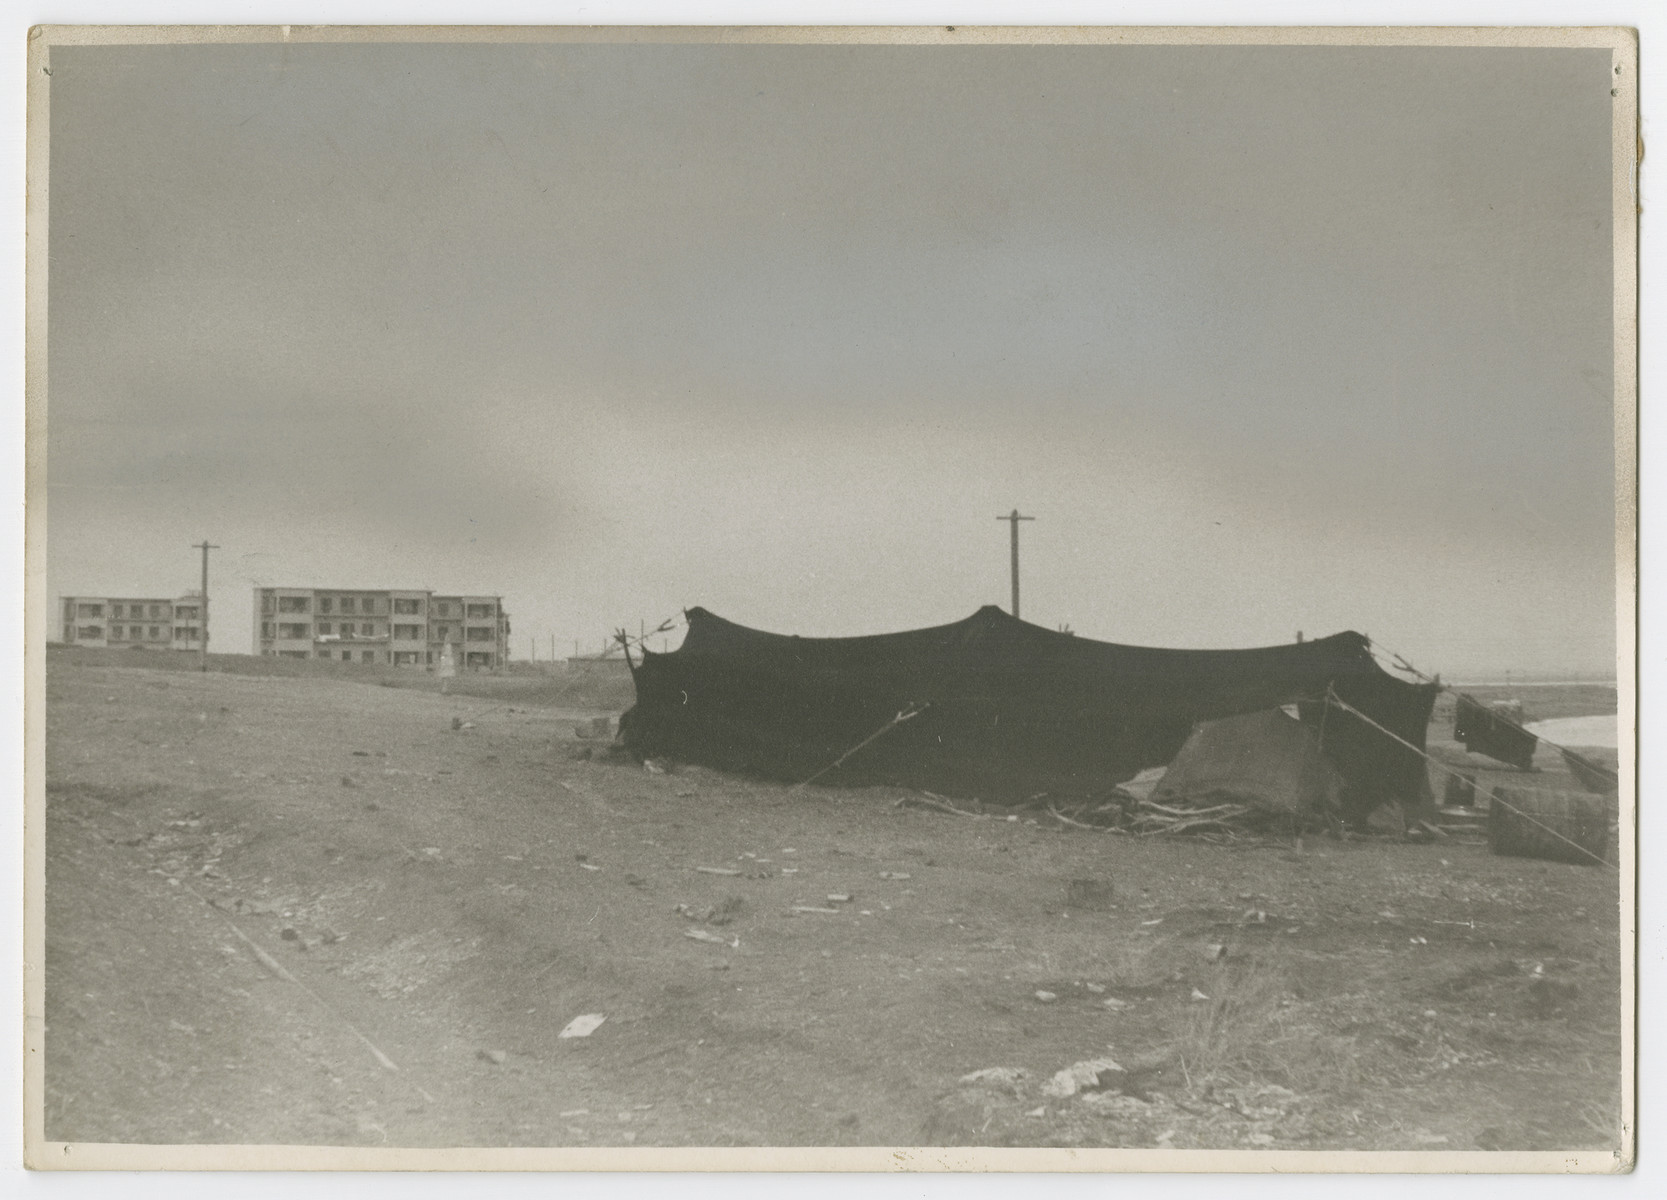 View of a Bedouin tent and a Jewish housing project near the banks of the Dead Sea. 

Photograph is used on page 188 of Robert Gessner's "Some of My Best Friends are Jews." The pencil inscription on the back of the photograph reads, "Dead Sea with PJ and Arb workers."